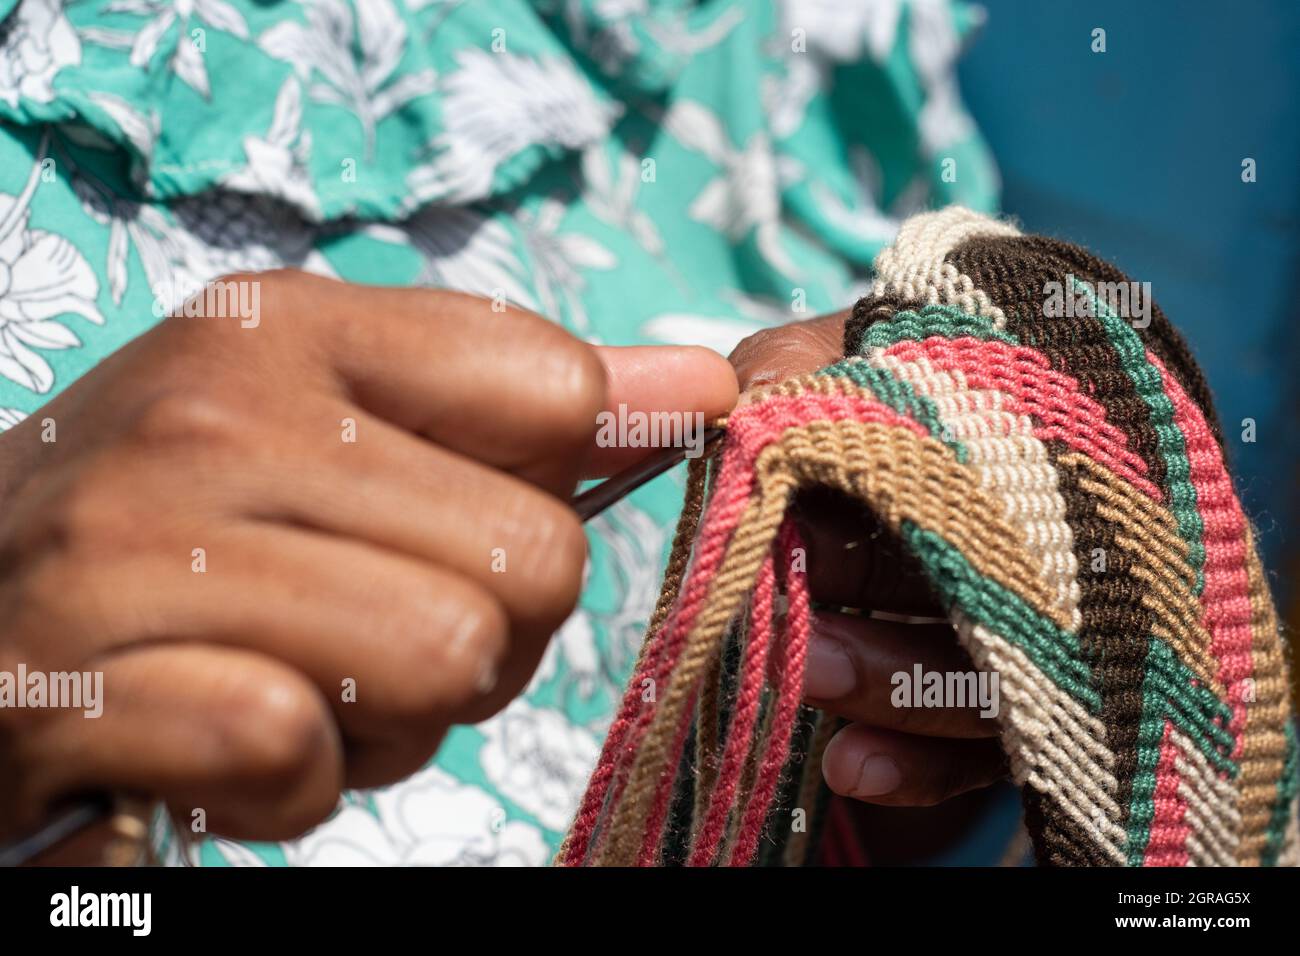 Mayapo, Colombia. 26th Sep, 2021. A Wayuu indigenous community member knits a traditional Wayuu backpack during a Humanitarian Mission developed by 'De Corazon Guajira' in Mayapo at La Guajira - Colombia were they visited the Wayuu indigenous communities 'Pactalia, Poromana, Perrohuila' on September 26, 2021. The Guajira region in Colombia is the poorest region in Colombia, with its people commongly living without drinkable water, electricity and food. Credit: Long Visual Press/Alamy Live News Stock Photo